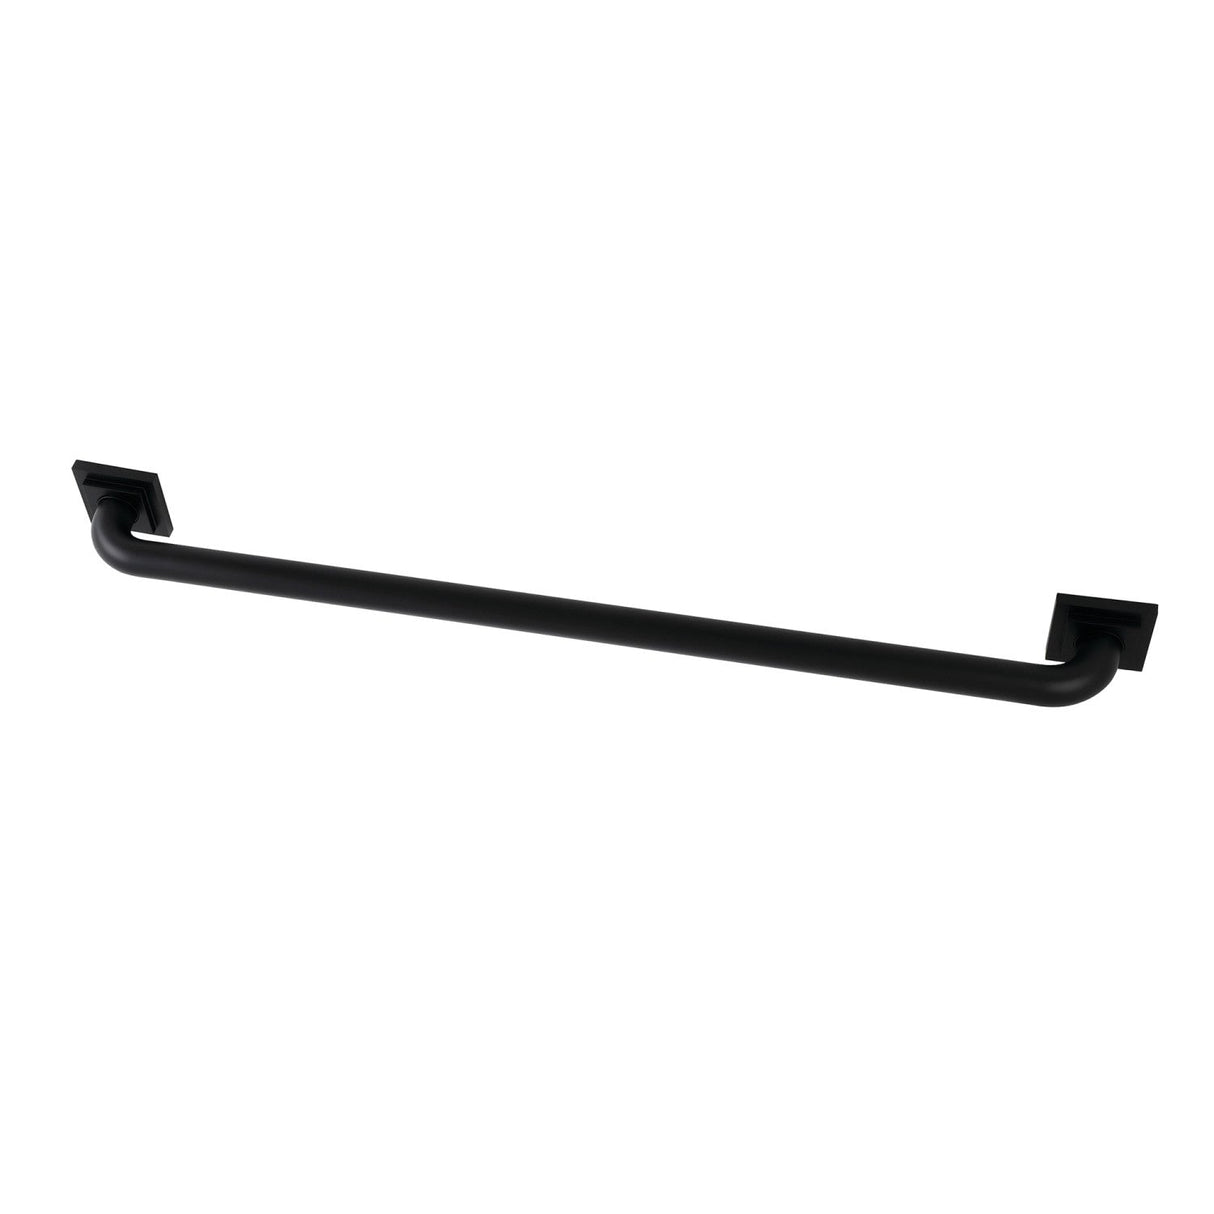 Claremont Thrive In Place DR614320 32-Inch x 1-1/4 Inch O.D Grab Bar, Matte Black